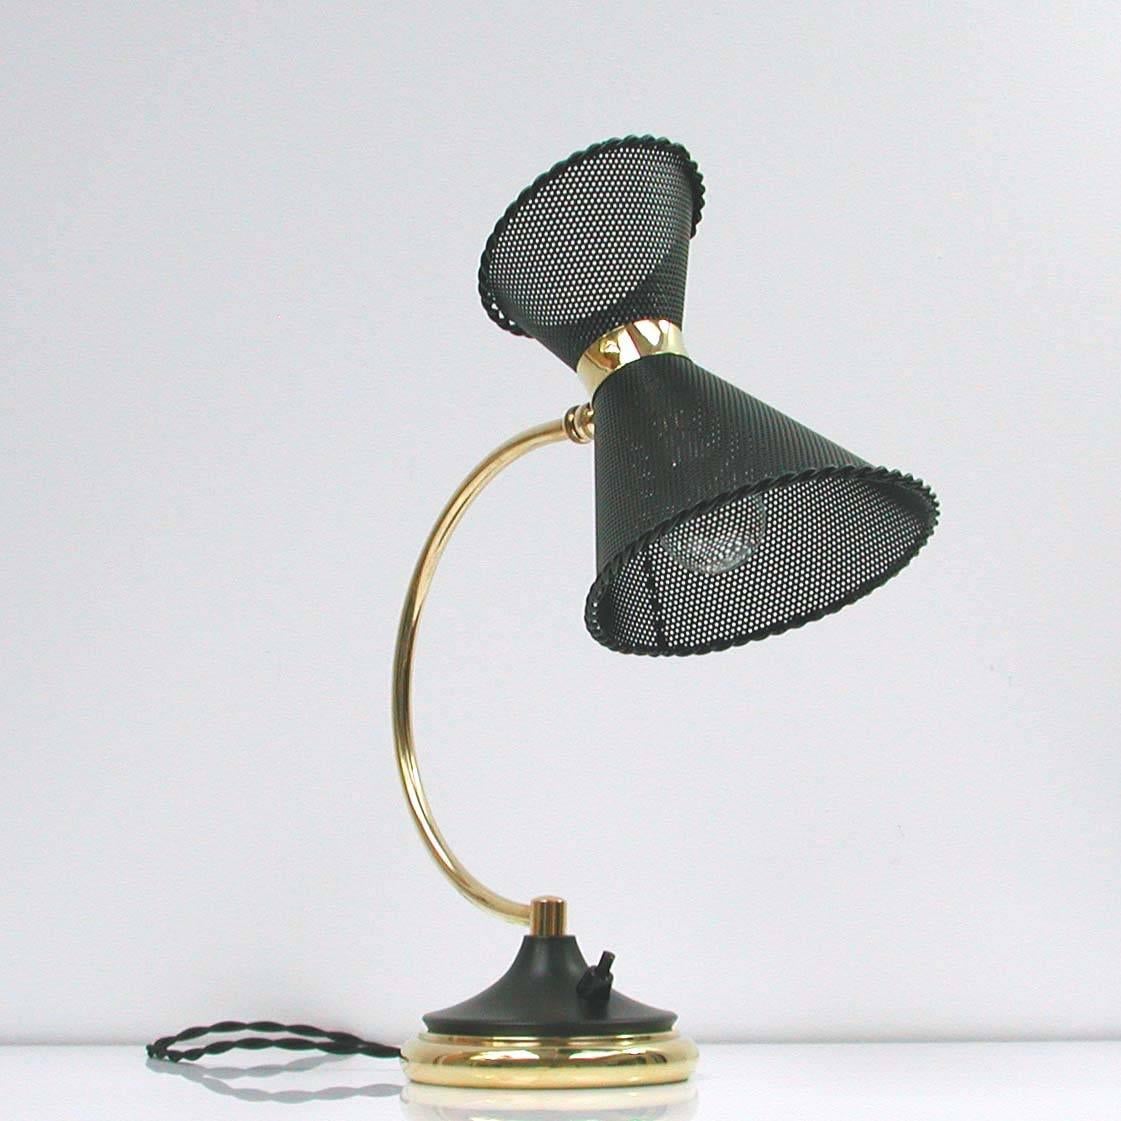 Very rare Mathieu Matégot attributed table lamp, made in France in the 1950s.

Brass lamp foot and rotatable black lacquered perforated lampshade.

The lamp has got a B22 bayonet socket and works on 110V as well as 220V.
European two-pin plug.